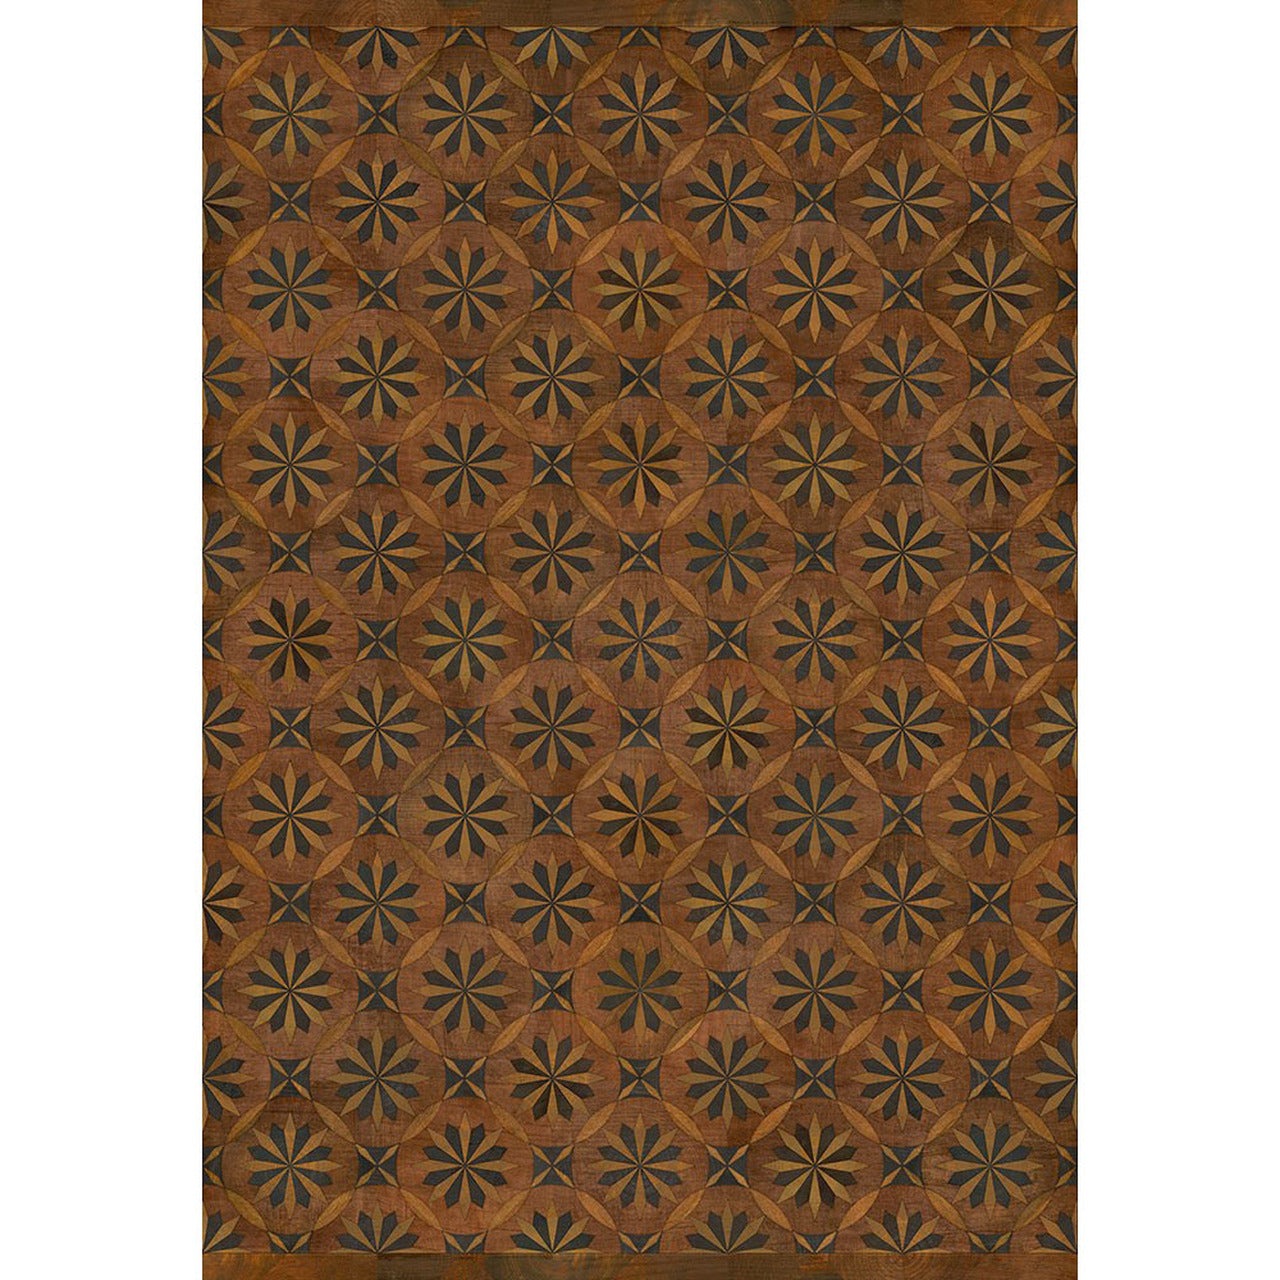 Artisanry Roycrofter Time And Chance Vinyl Floor Cloth